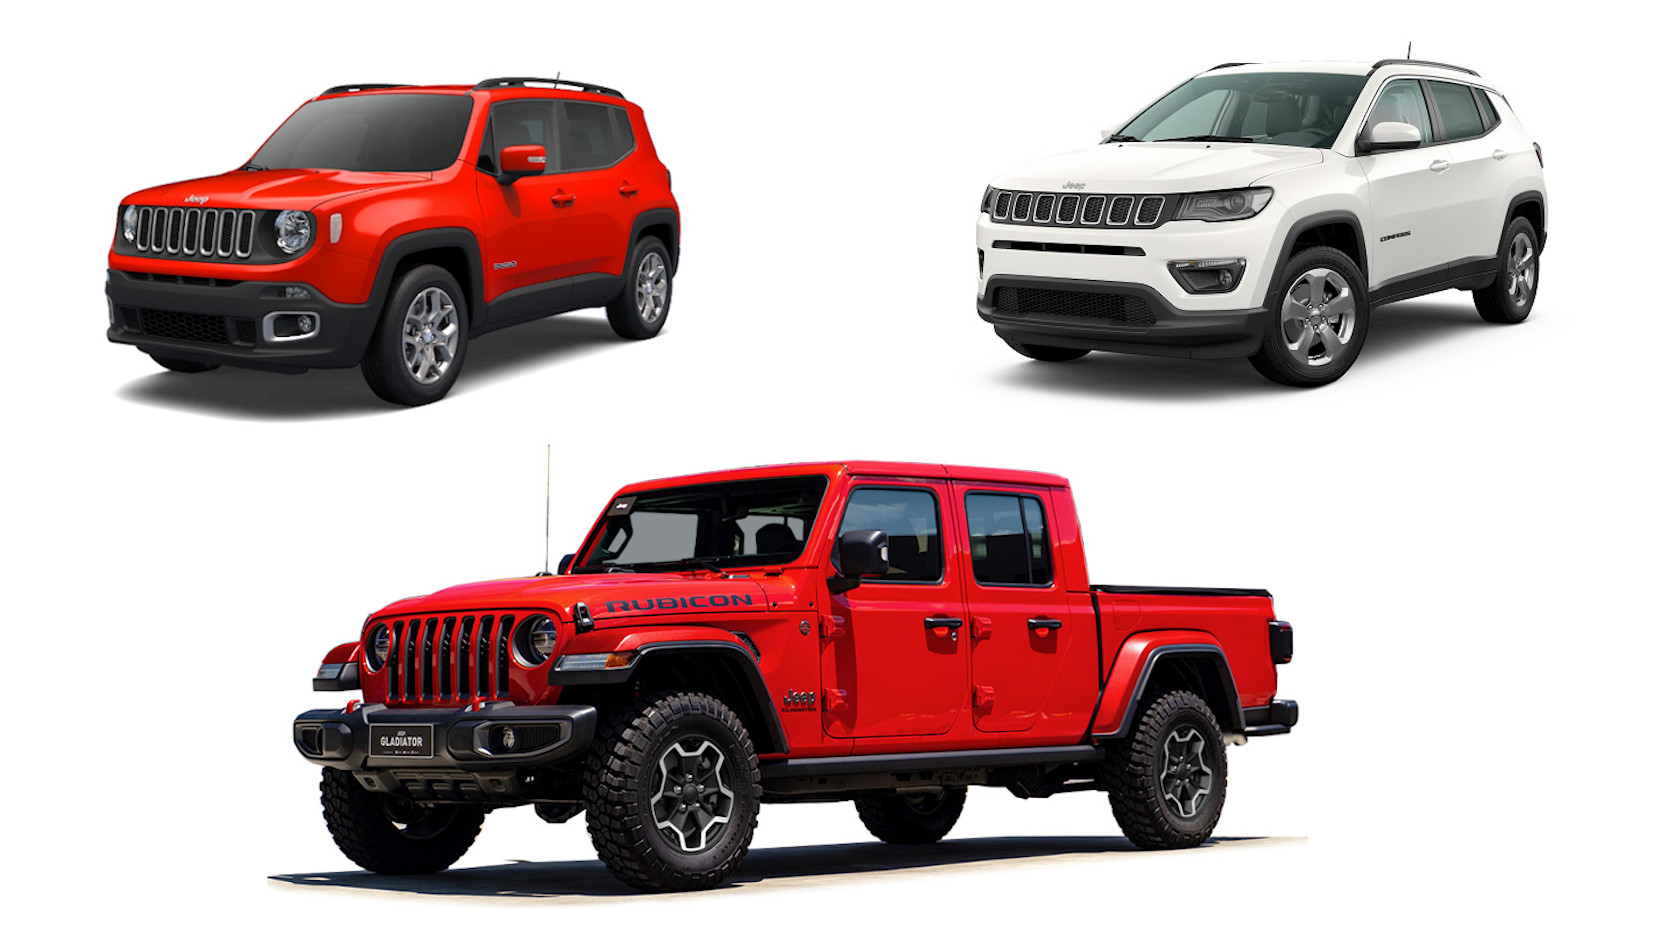 Discounts on Jeep, Ram vehicles are available this September